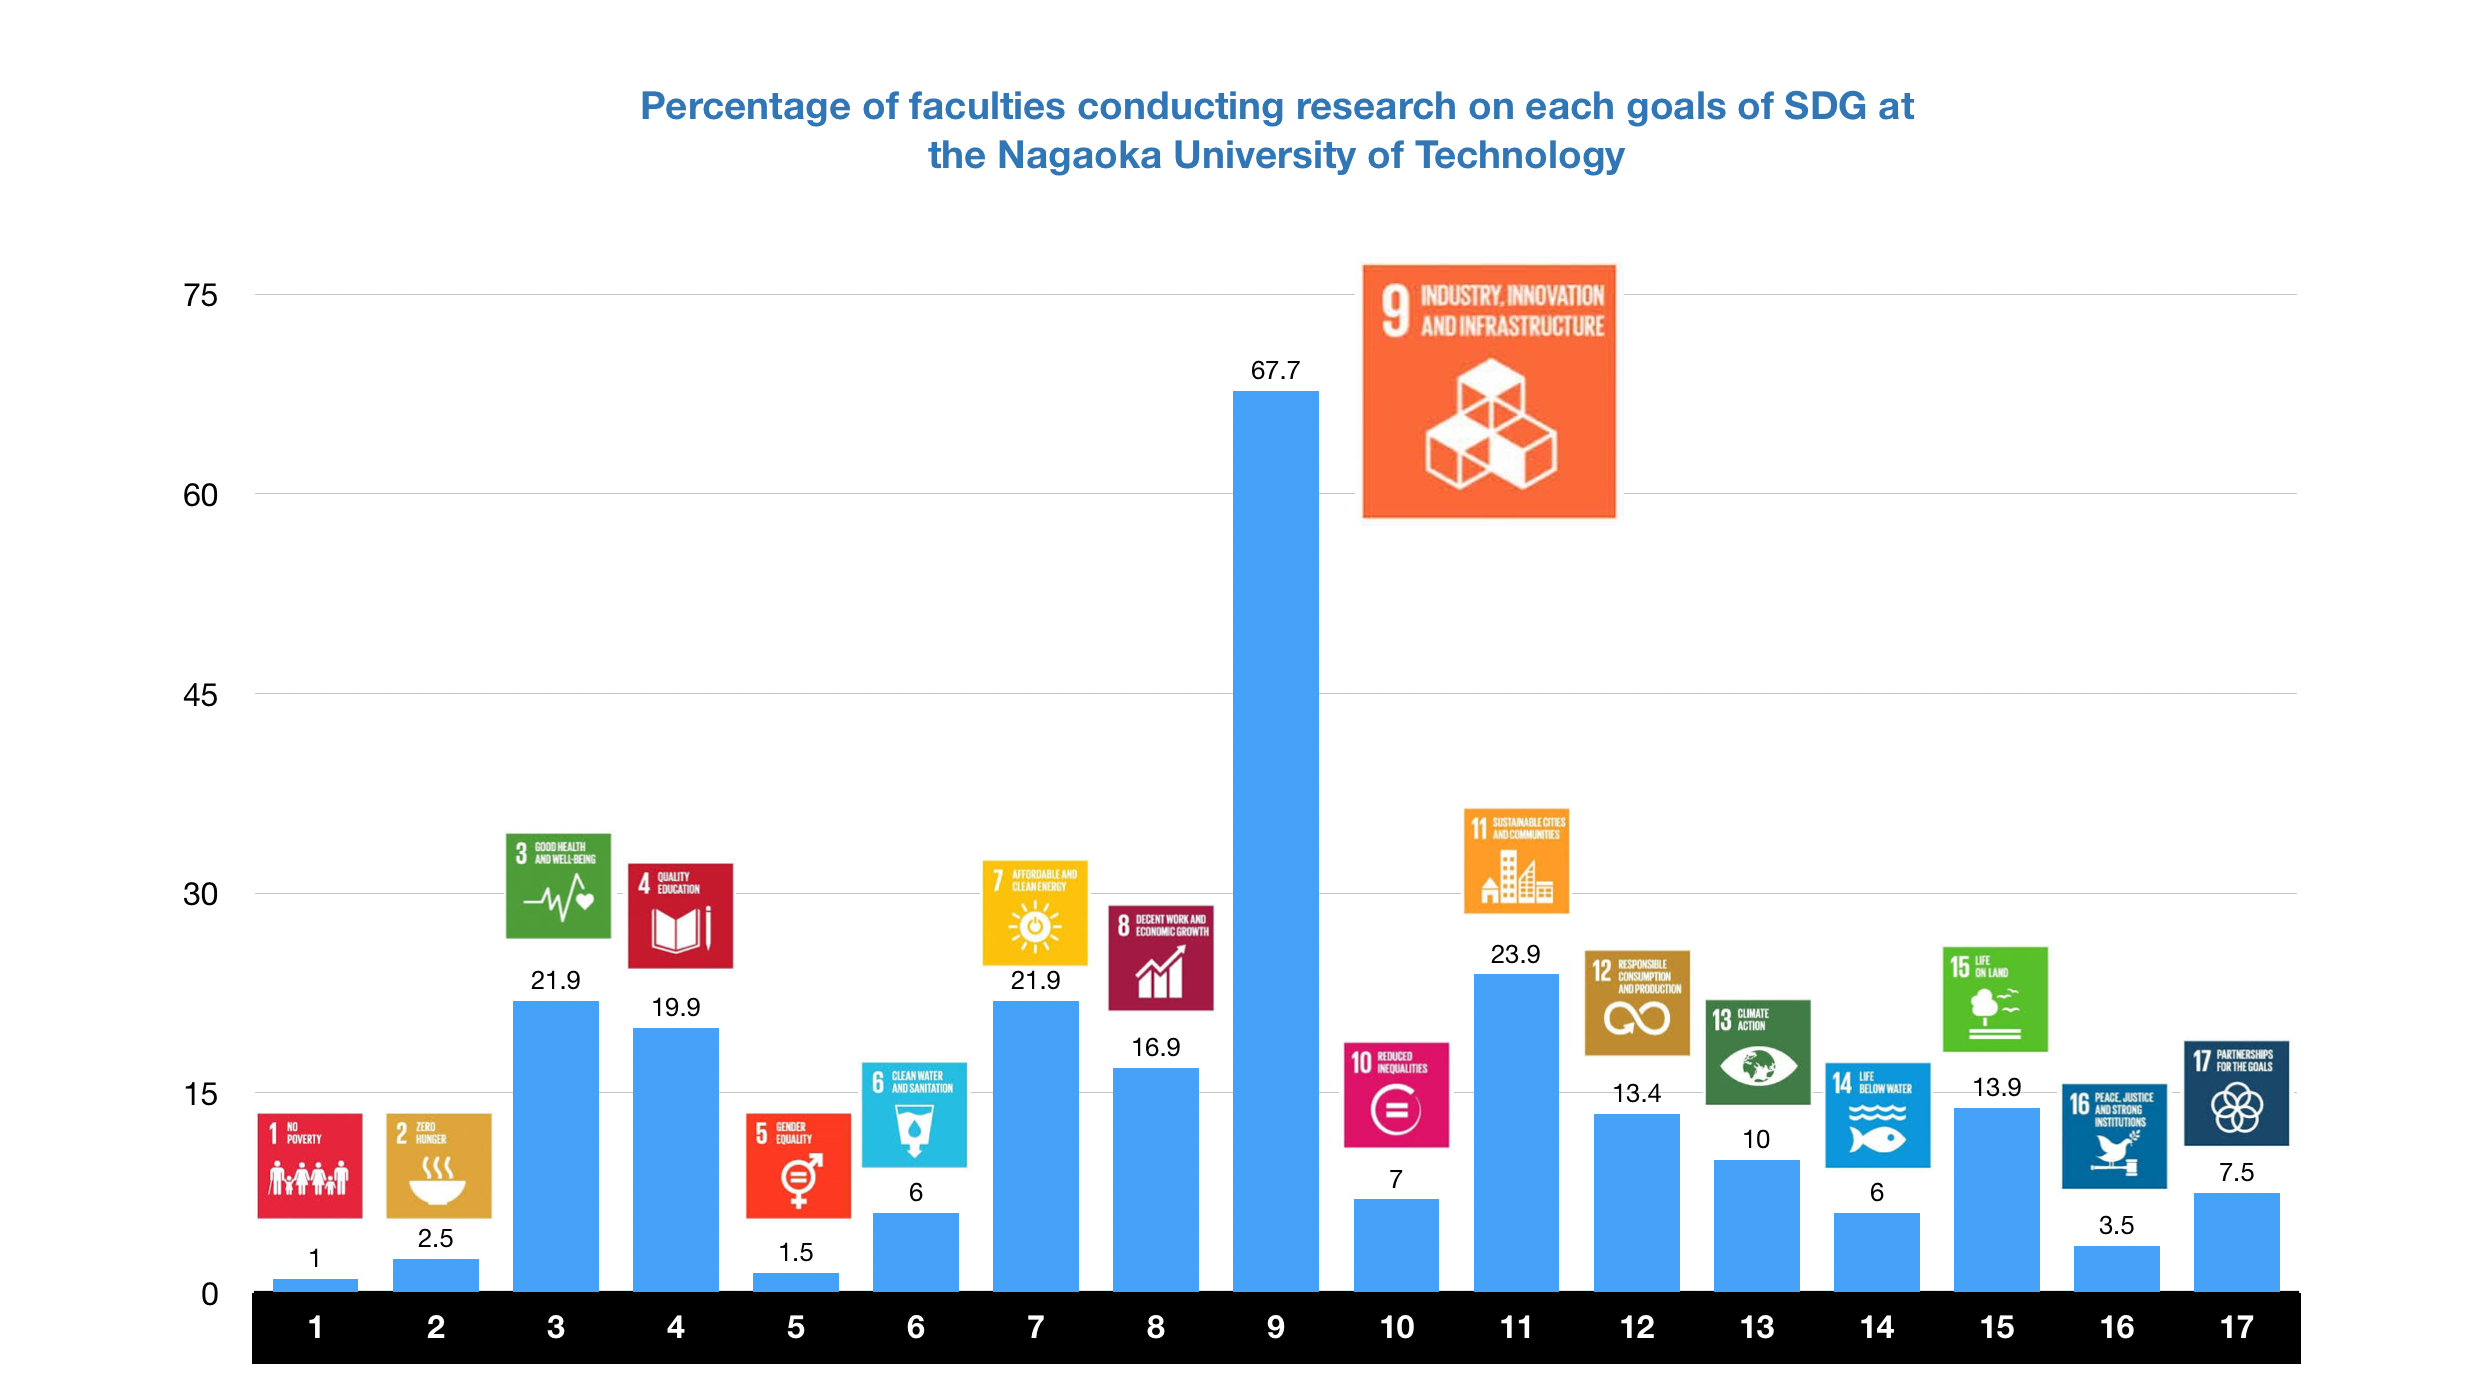 NUT SDG-Related Researches